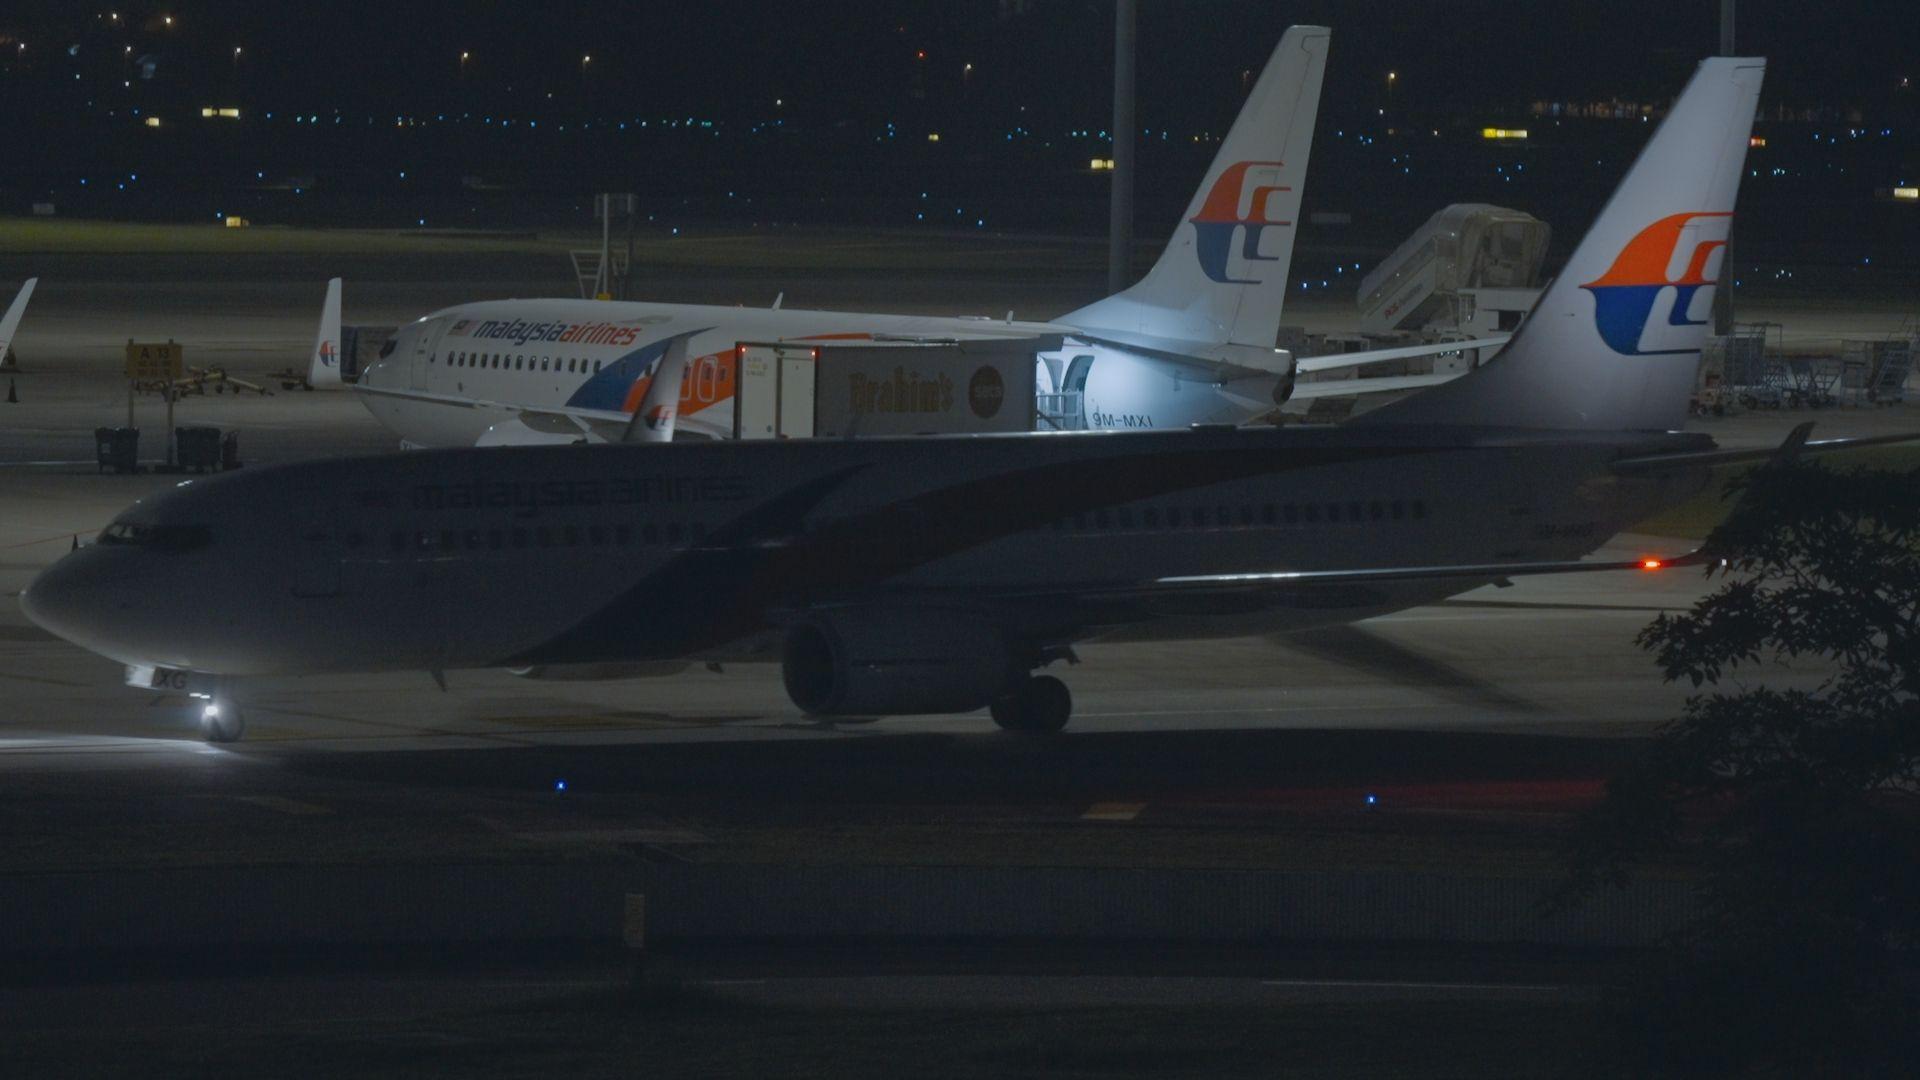 still from MH370: The Enigma of the Lost Flight